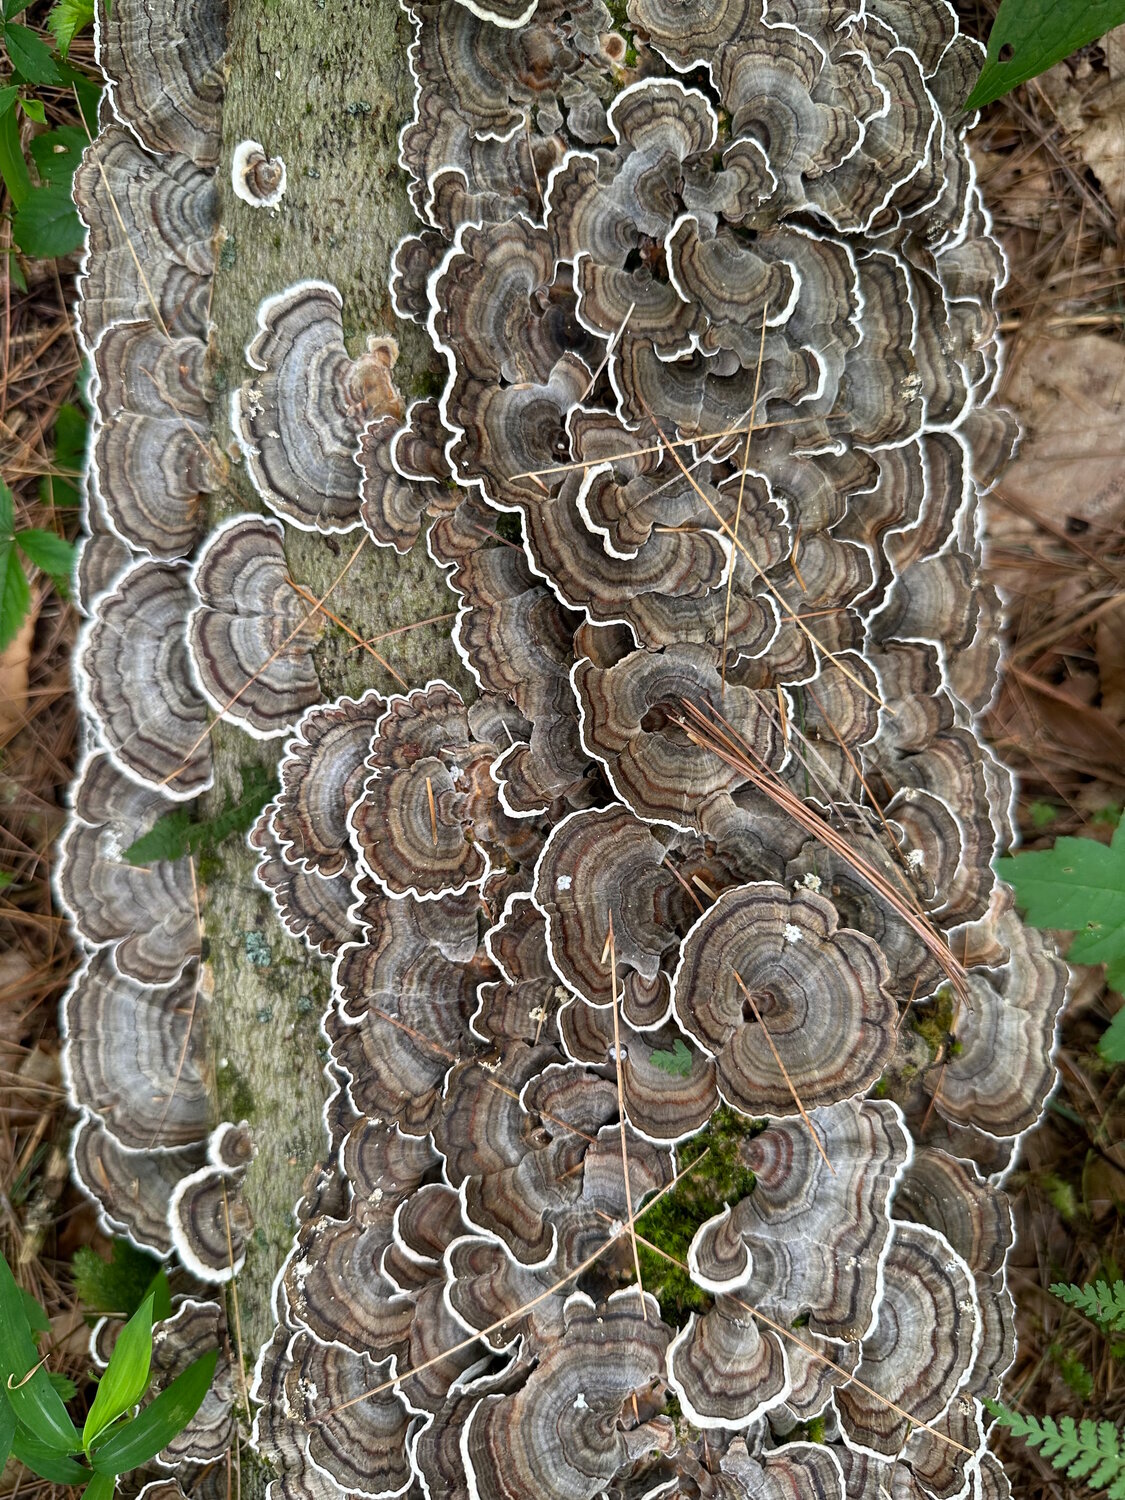 This striking cluster of turkey tail mushrooms caught my eye on a recent hike in Pike County, PA. While remarkable for their beauty alone, turkey tail fungi are highly prized for their medicinal value as well.